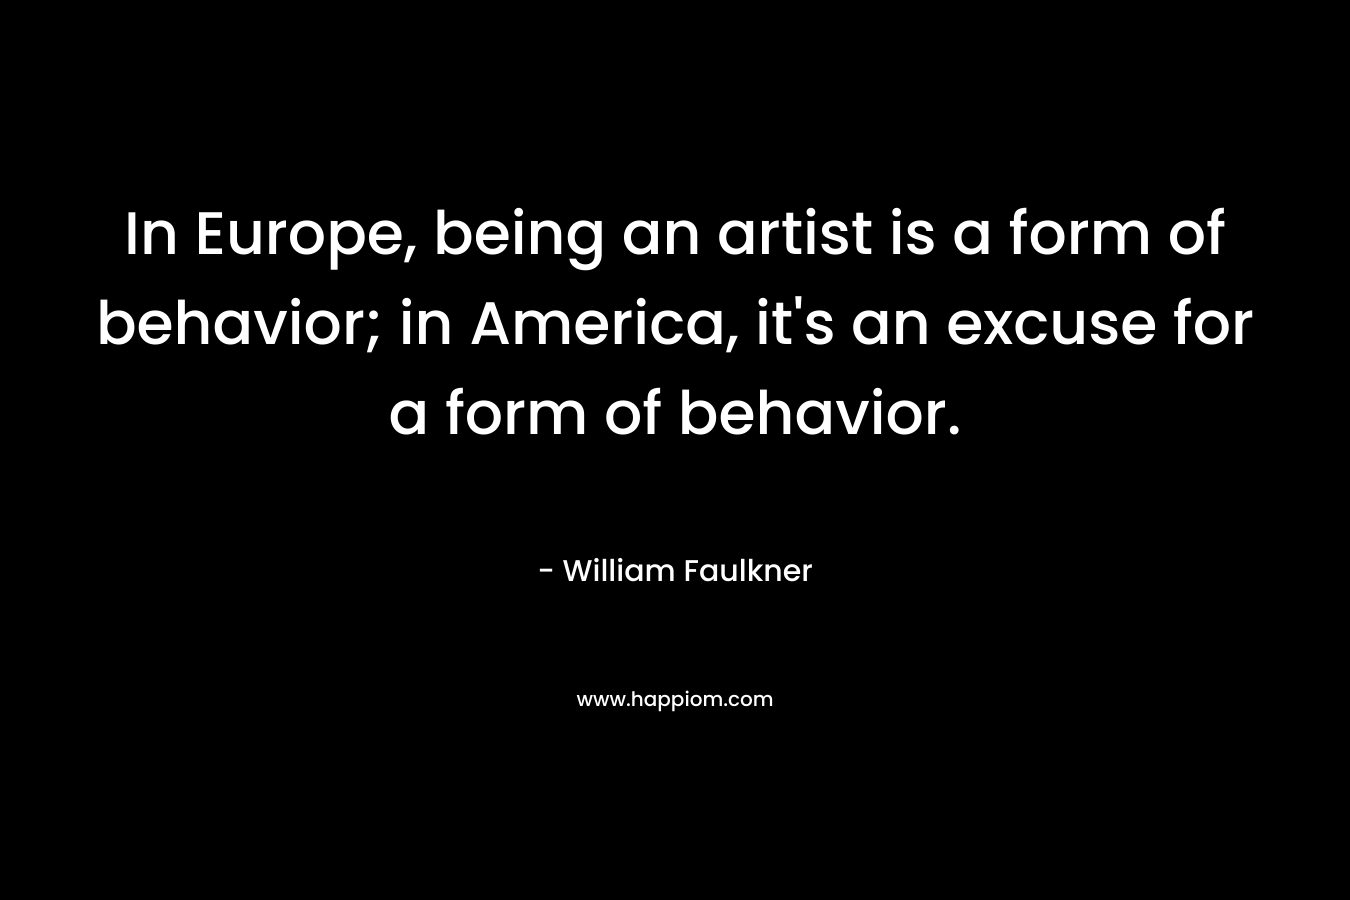 In Europe, being an artist is a form of behavior; in America, it’s an excuse for a form of behavior. – William Faulkner